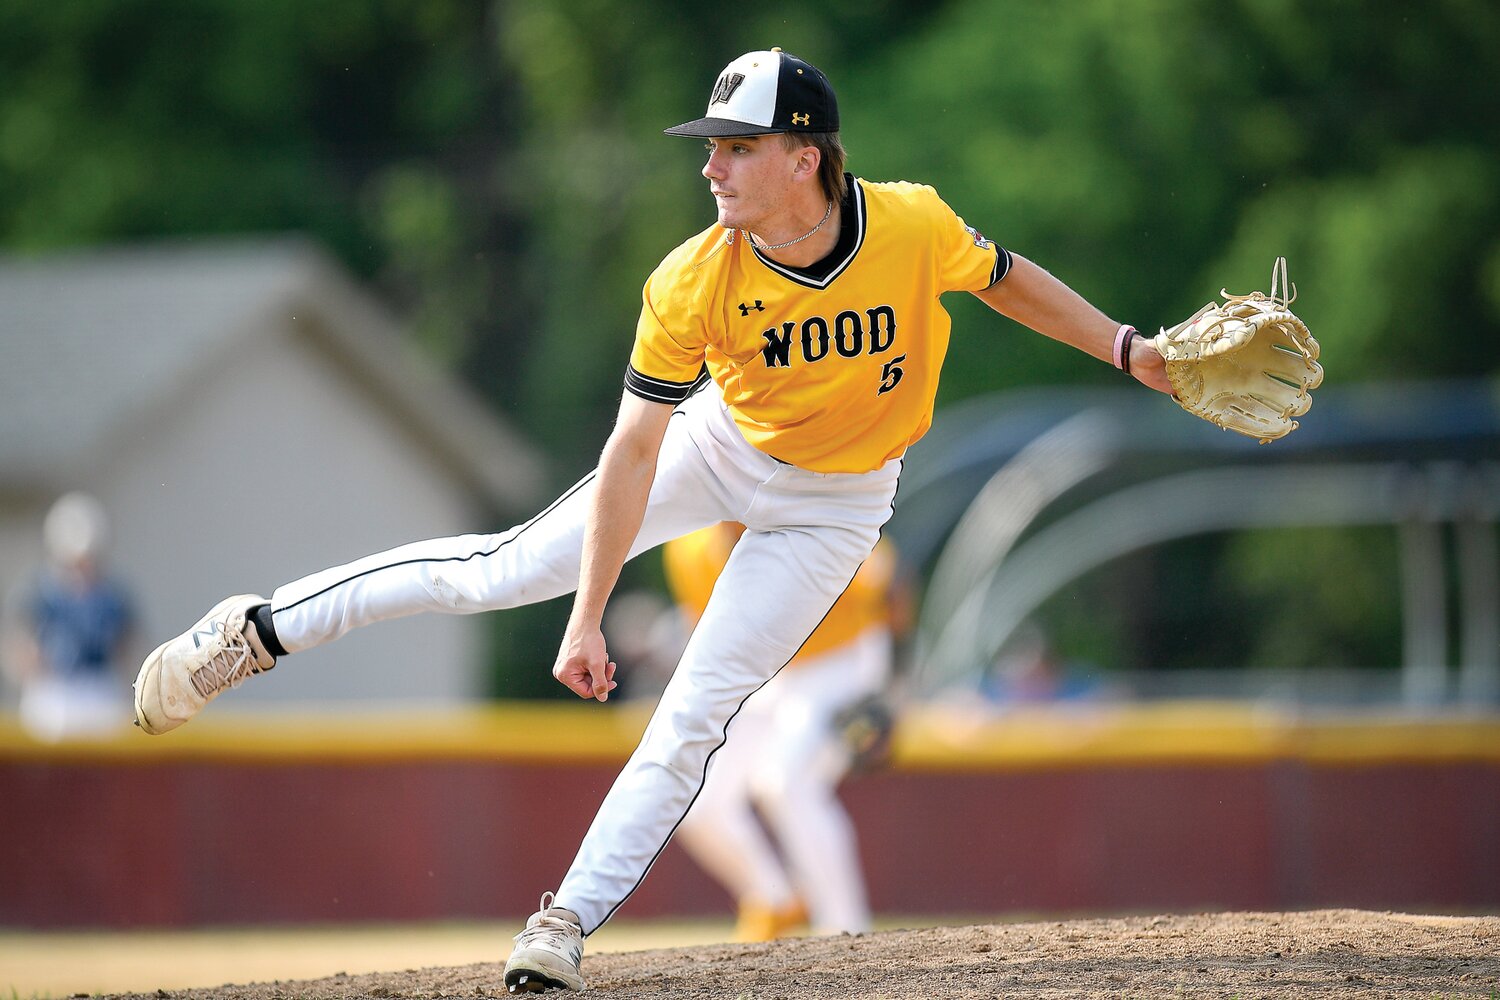 Archbishop Wood starting pitcher Braden Kelly delivers a pitch during first-inning action in which Dallas answered back with a run, tying the game at 1 apiece.